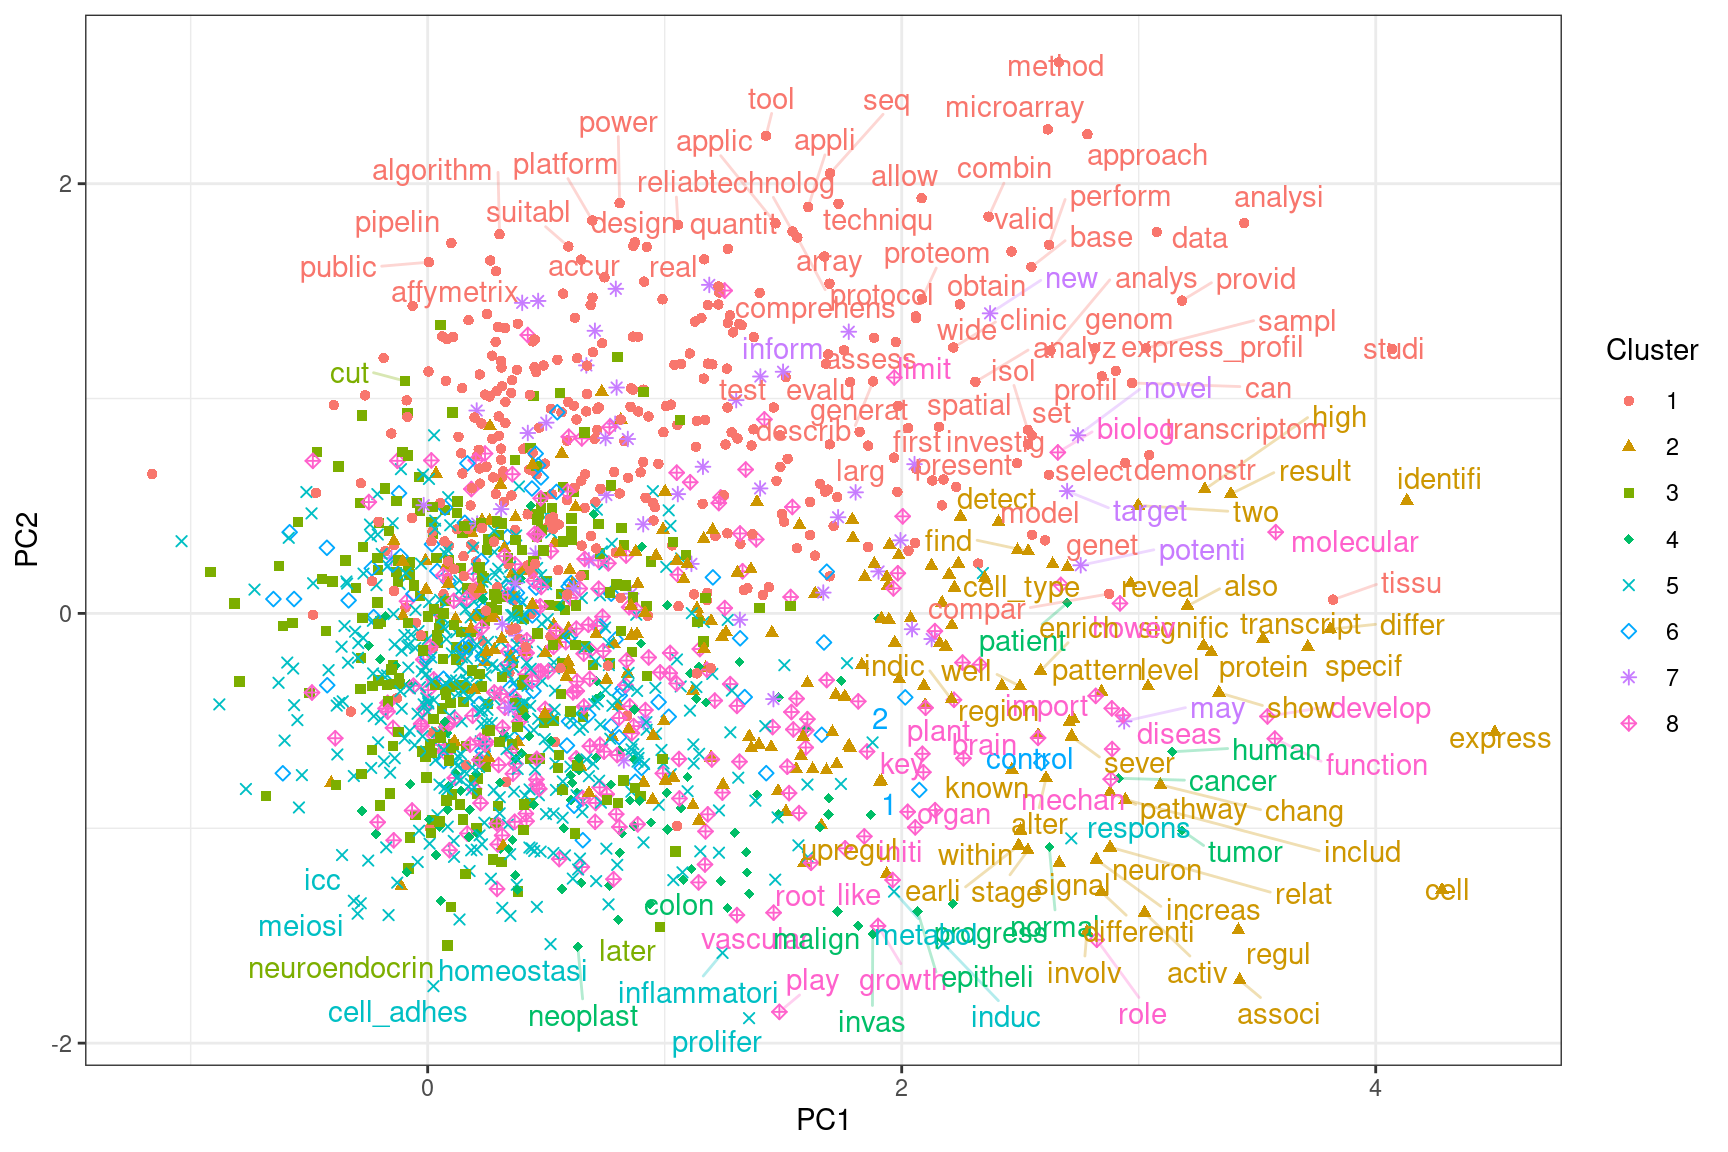 Projection of word embeddings into the first 2 PCs. Each point is a word occuring over 30 times in the corpus. Not all words are labeled to avoid overlaps in the labels. Words and points are colored by Louvain clusters.